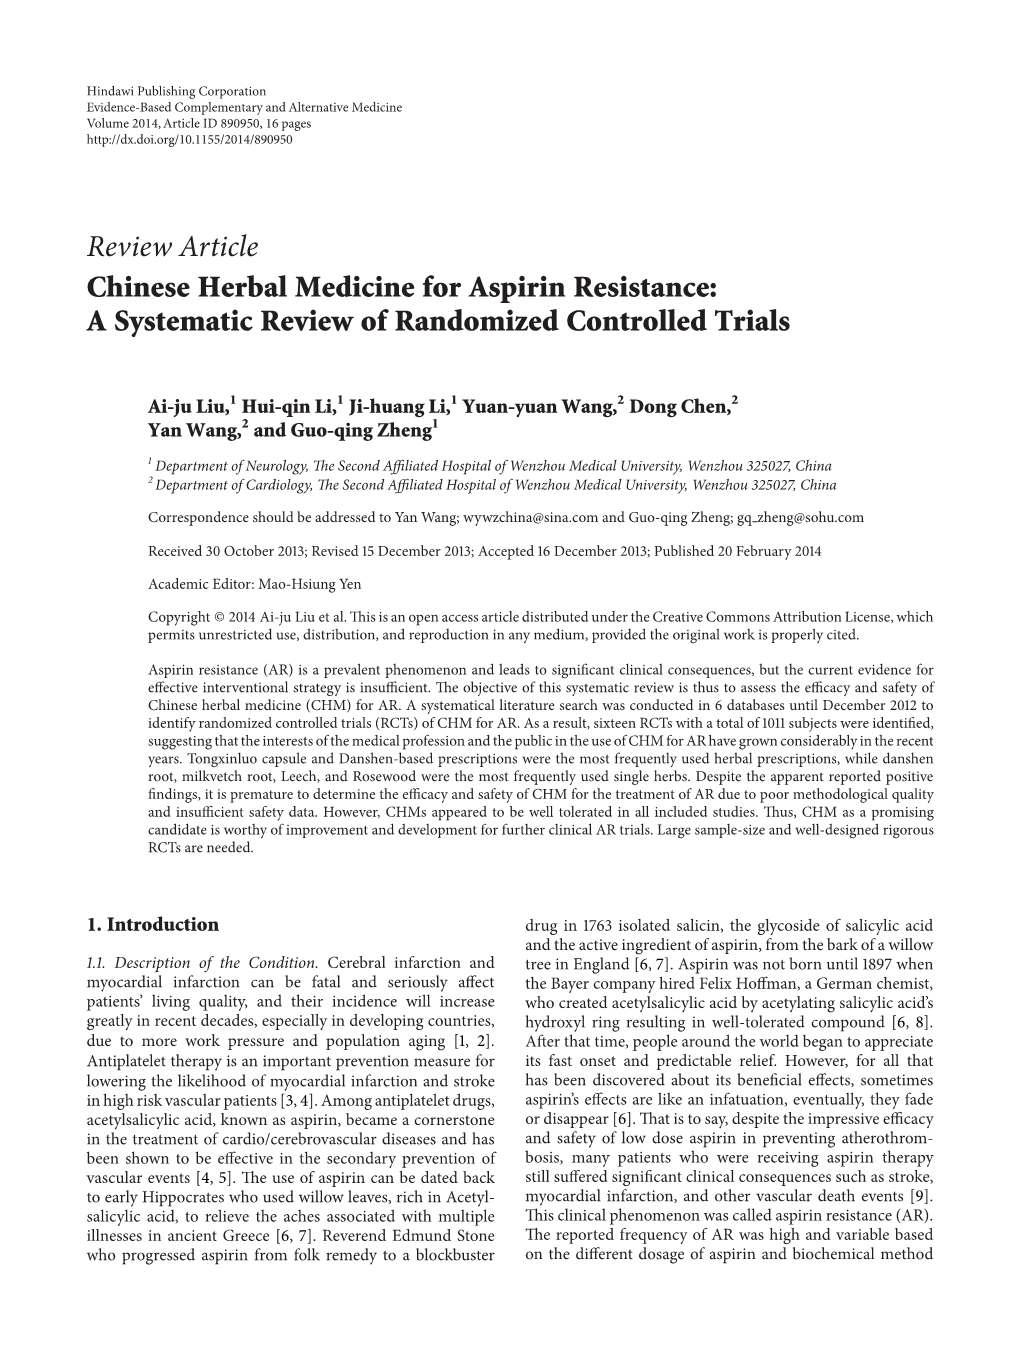 Chinese Herbal Medicine for Aspirin Resistance: a Systematic Review of Randomized Controlled Trials